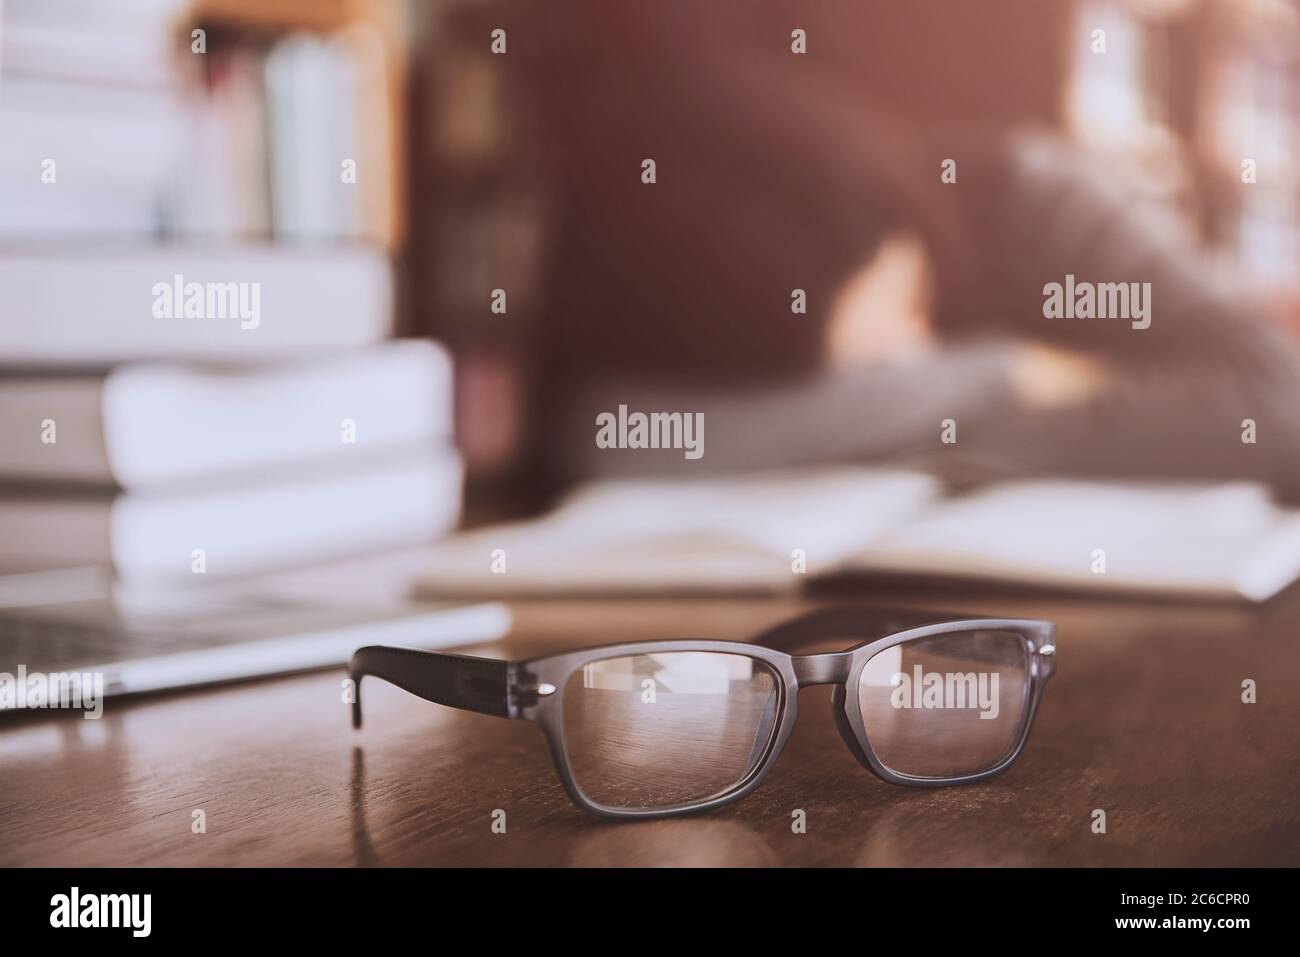 blur Close-shot of a glasses, young girl sleeping near a pile of books and laptop in the background. Stock Photo